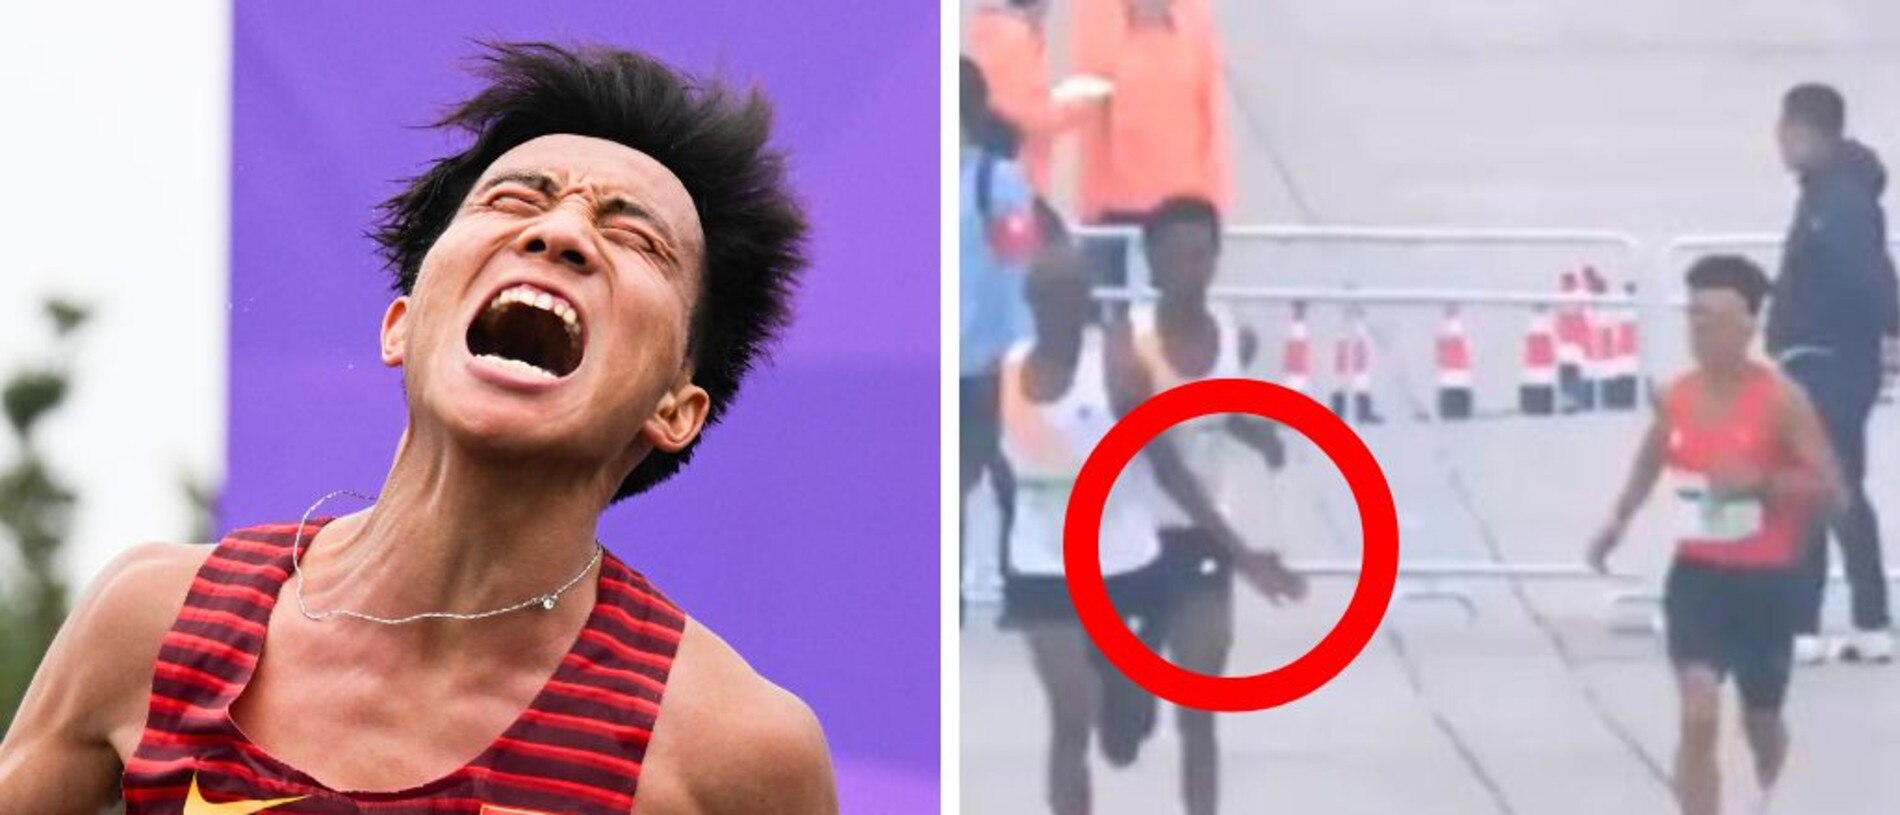 Bizarre video footage captured the moment three East African runners appeared to wave a Chinese athlete ahead of them during the Beijing Half Marathon on Sunday, allowing him to win first place.